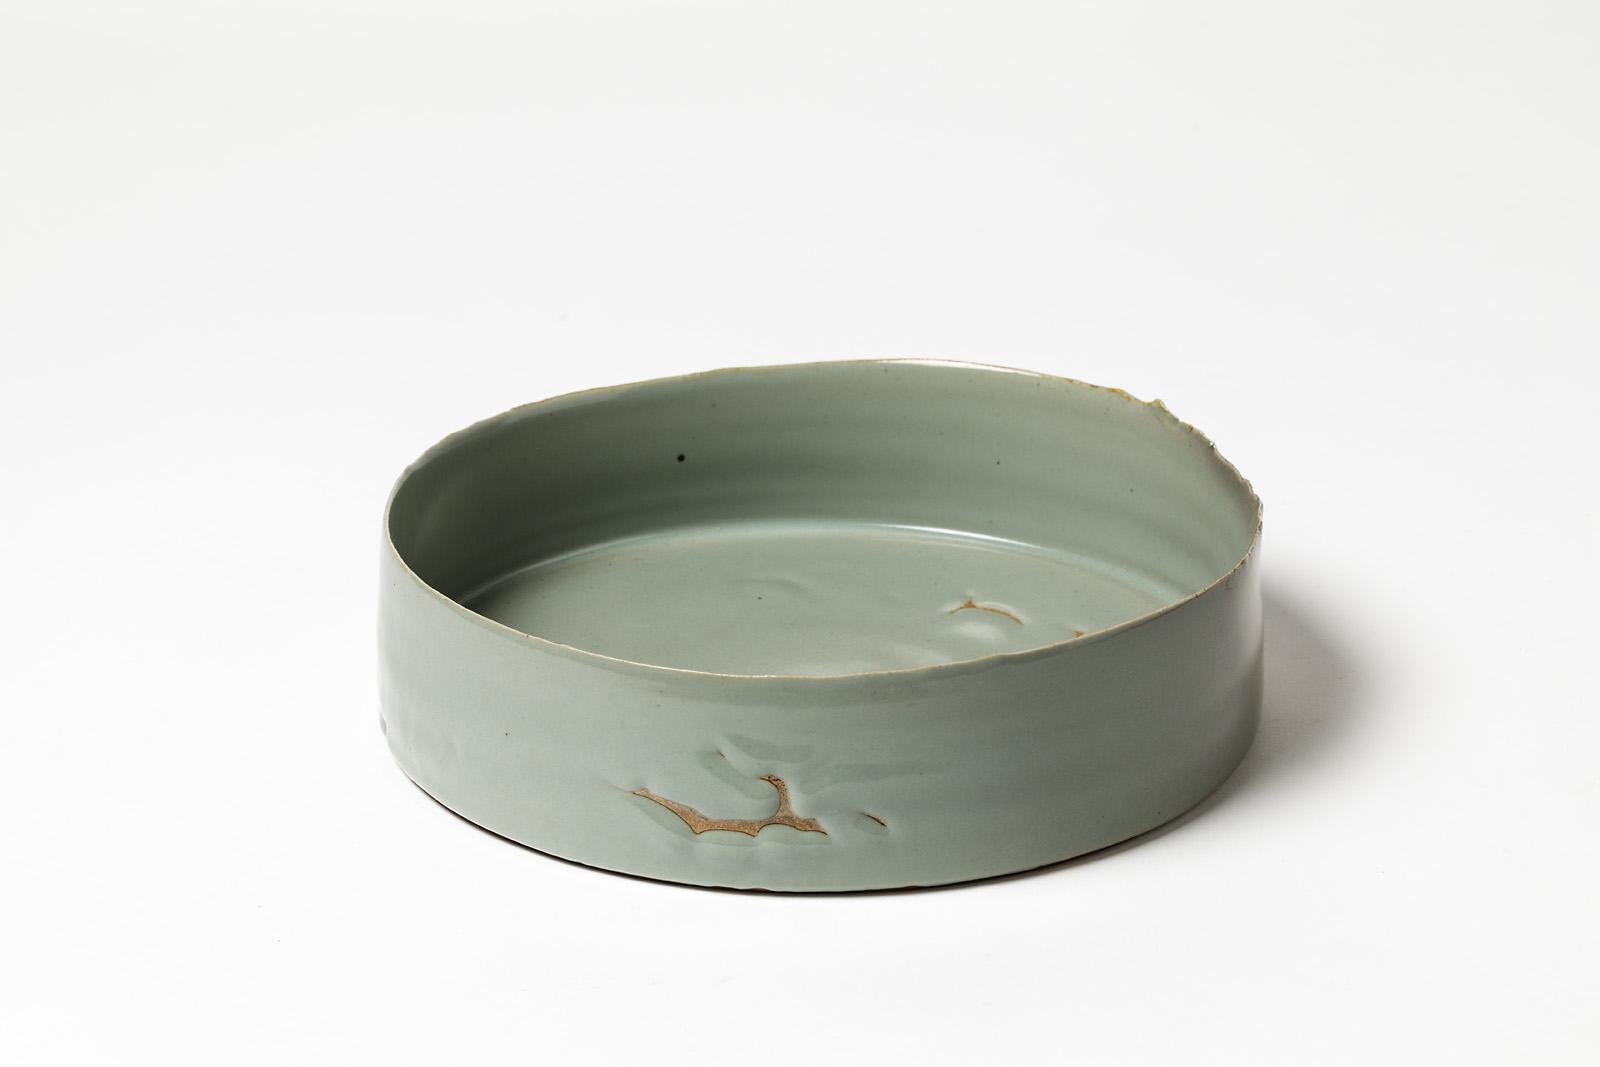 Contemporary Collectible Rare Celadon Ceramic Plate by Emmanuel Boos French Artist For Sale